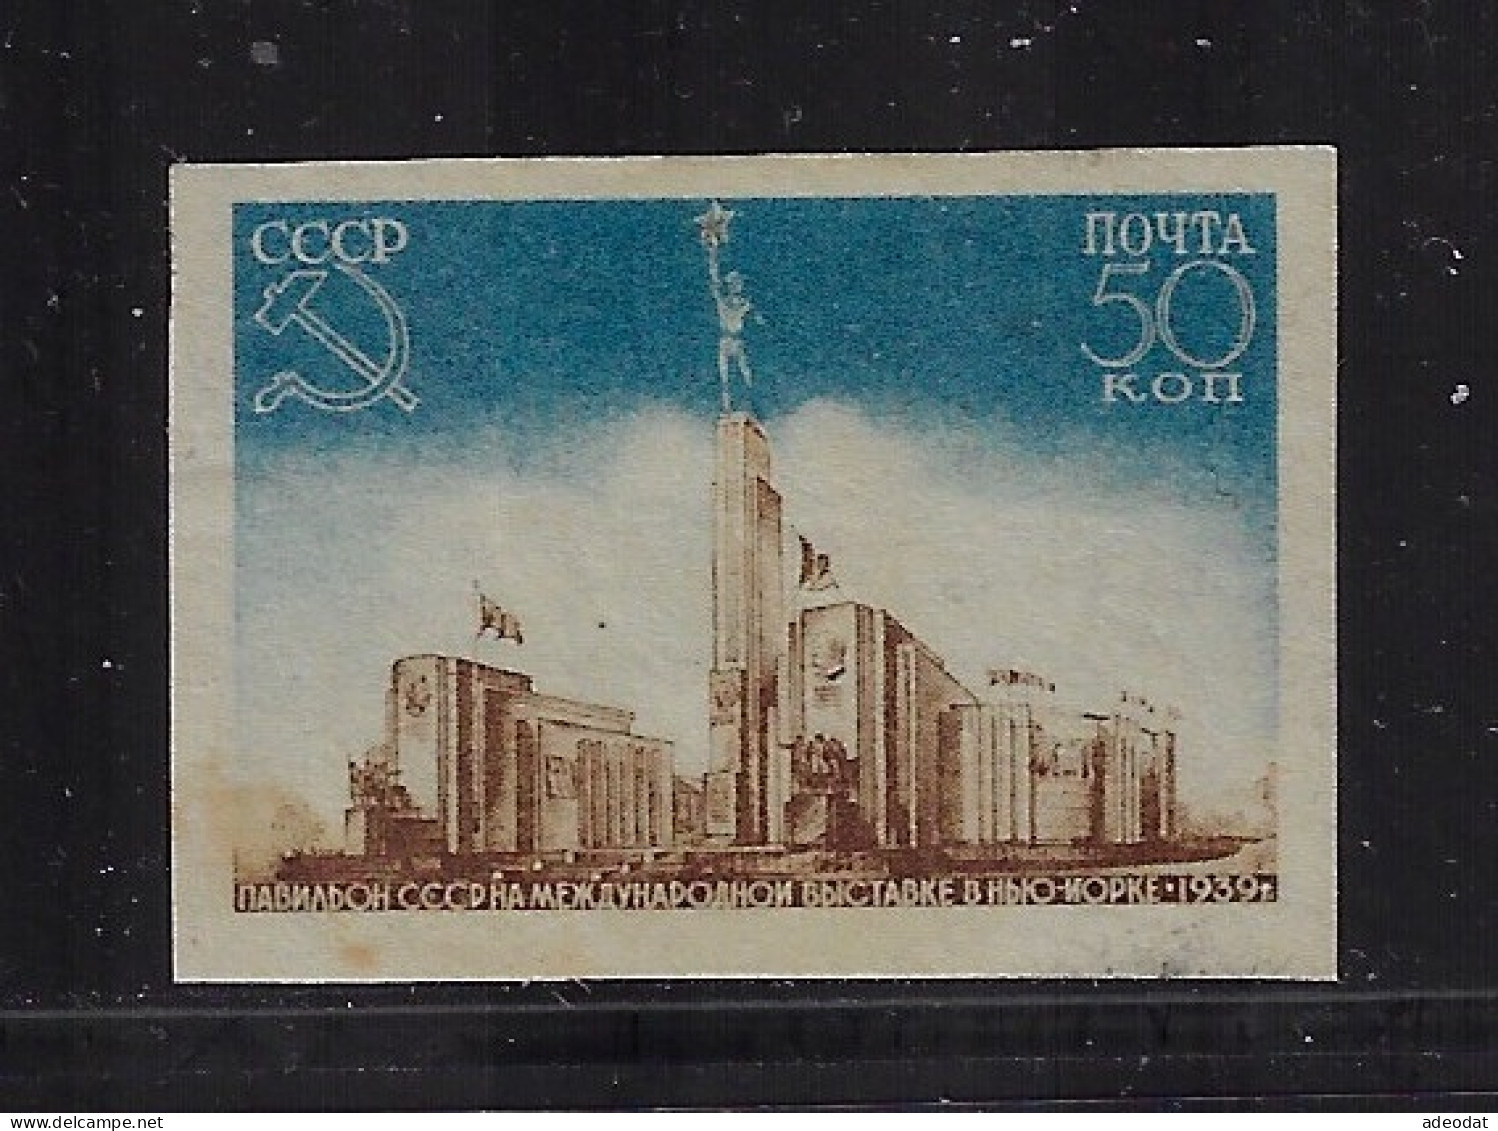 RUSSIA 1939 SCOTT #715  Imperf   Used - Used Stamps